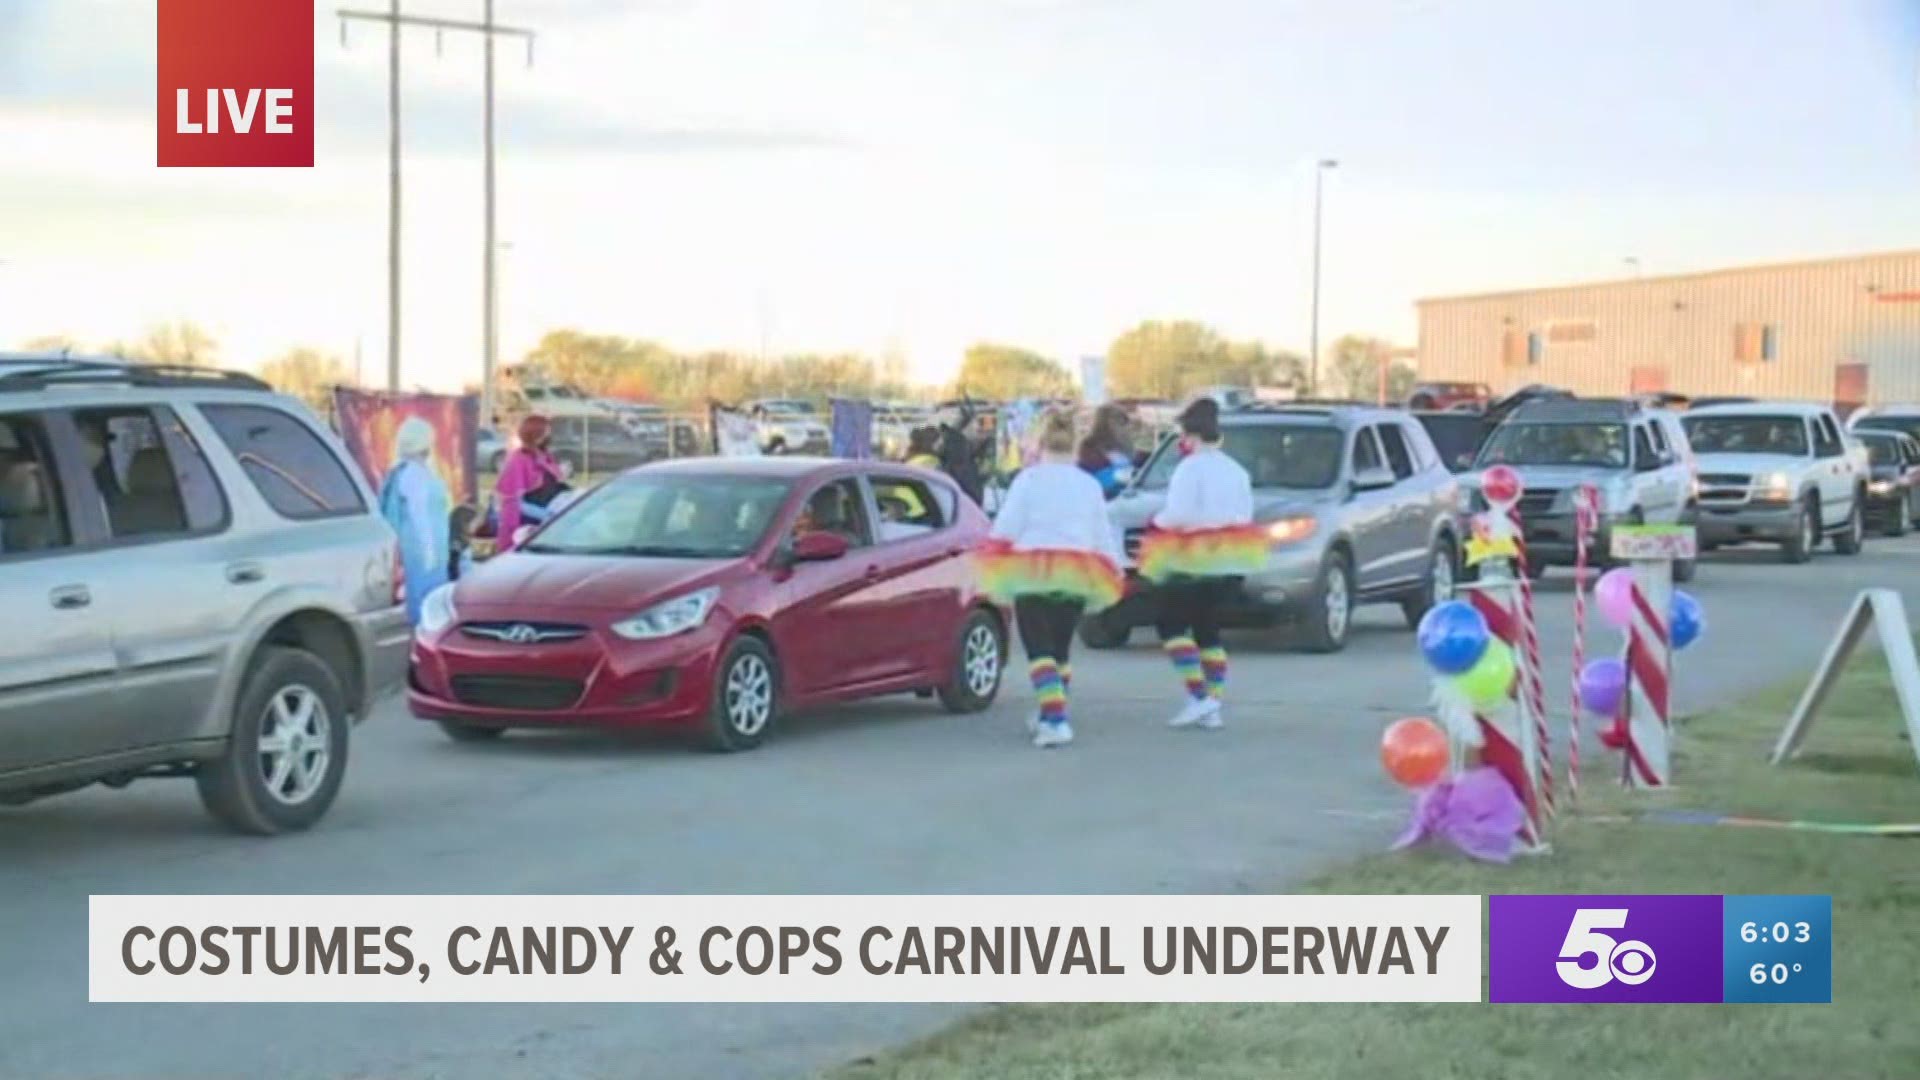 It's a busy night at the Benton County Fairgrounds as hundreds of trick-or-treaters look to have some COVID safe fun during the Costumes, Candy & Cops event.